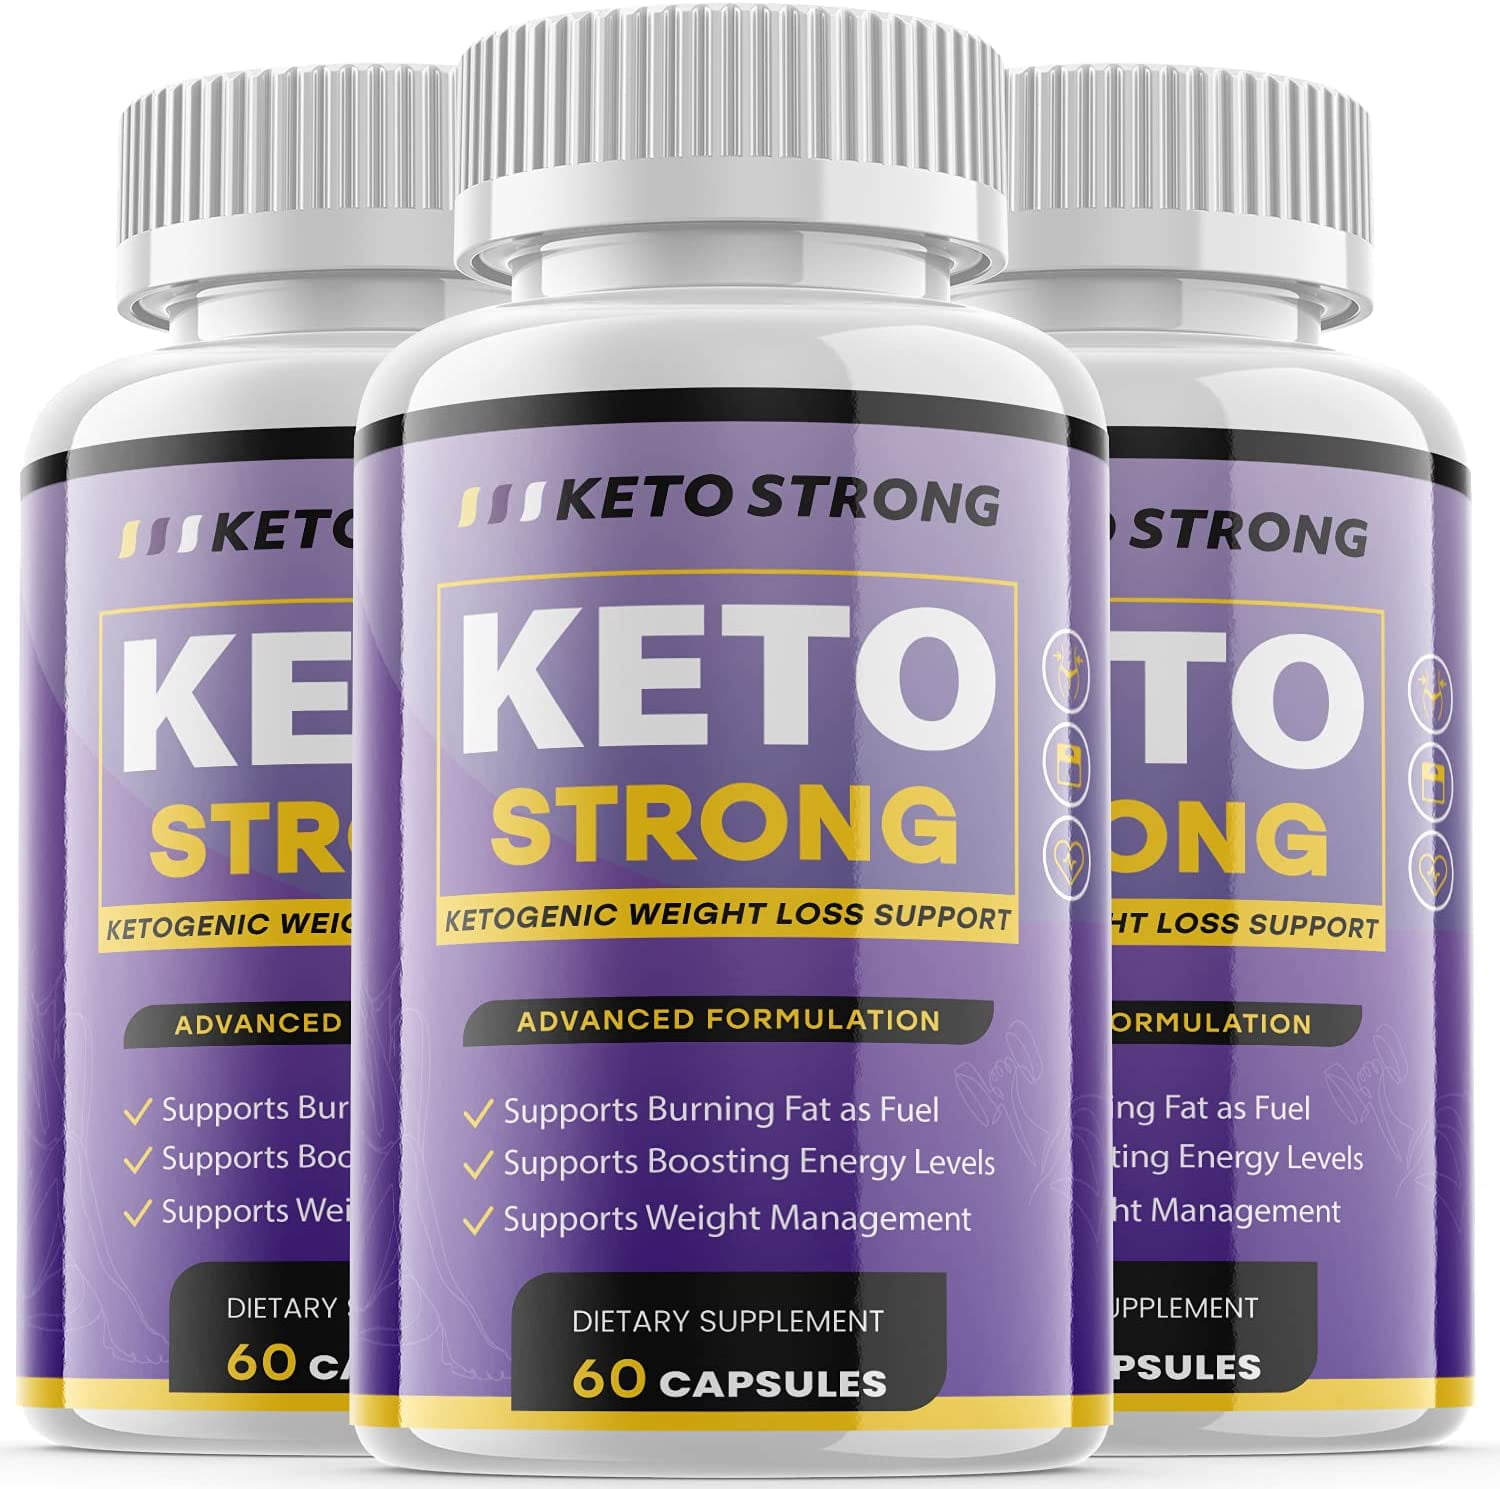 What are Keto Strong reviews? - Quora